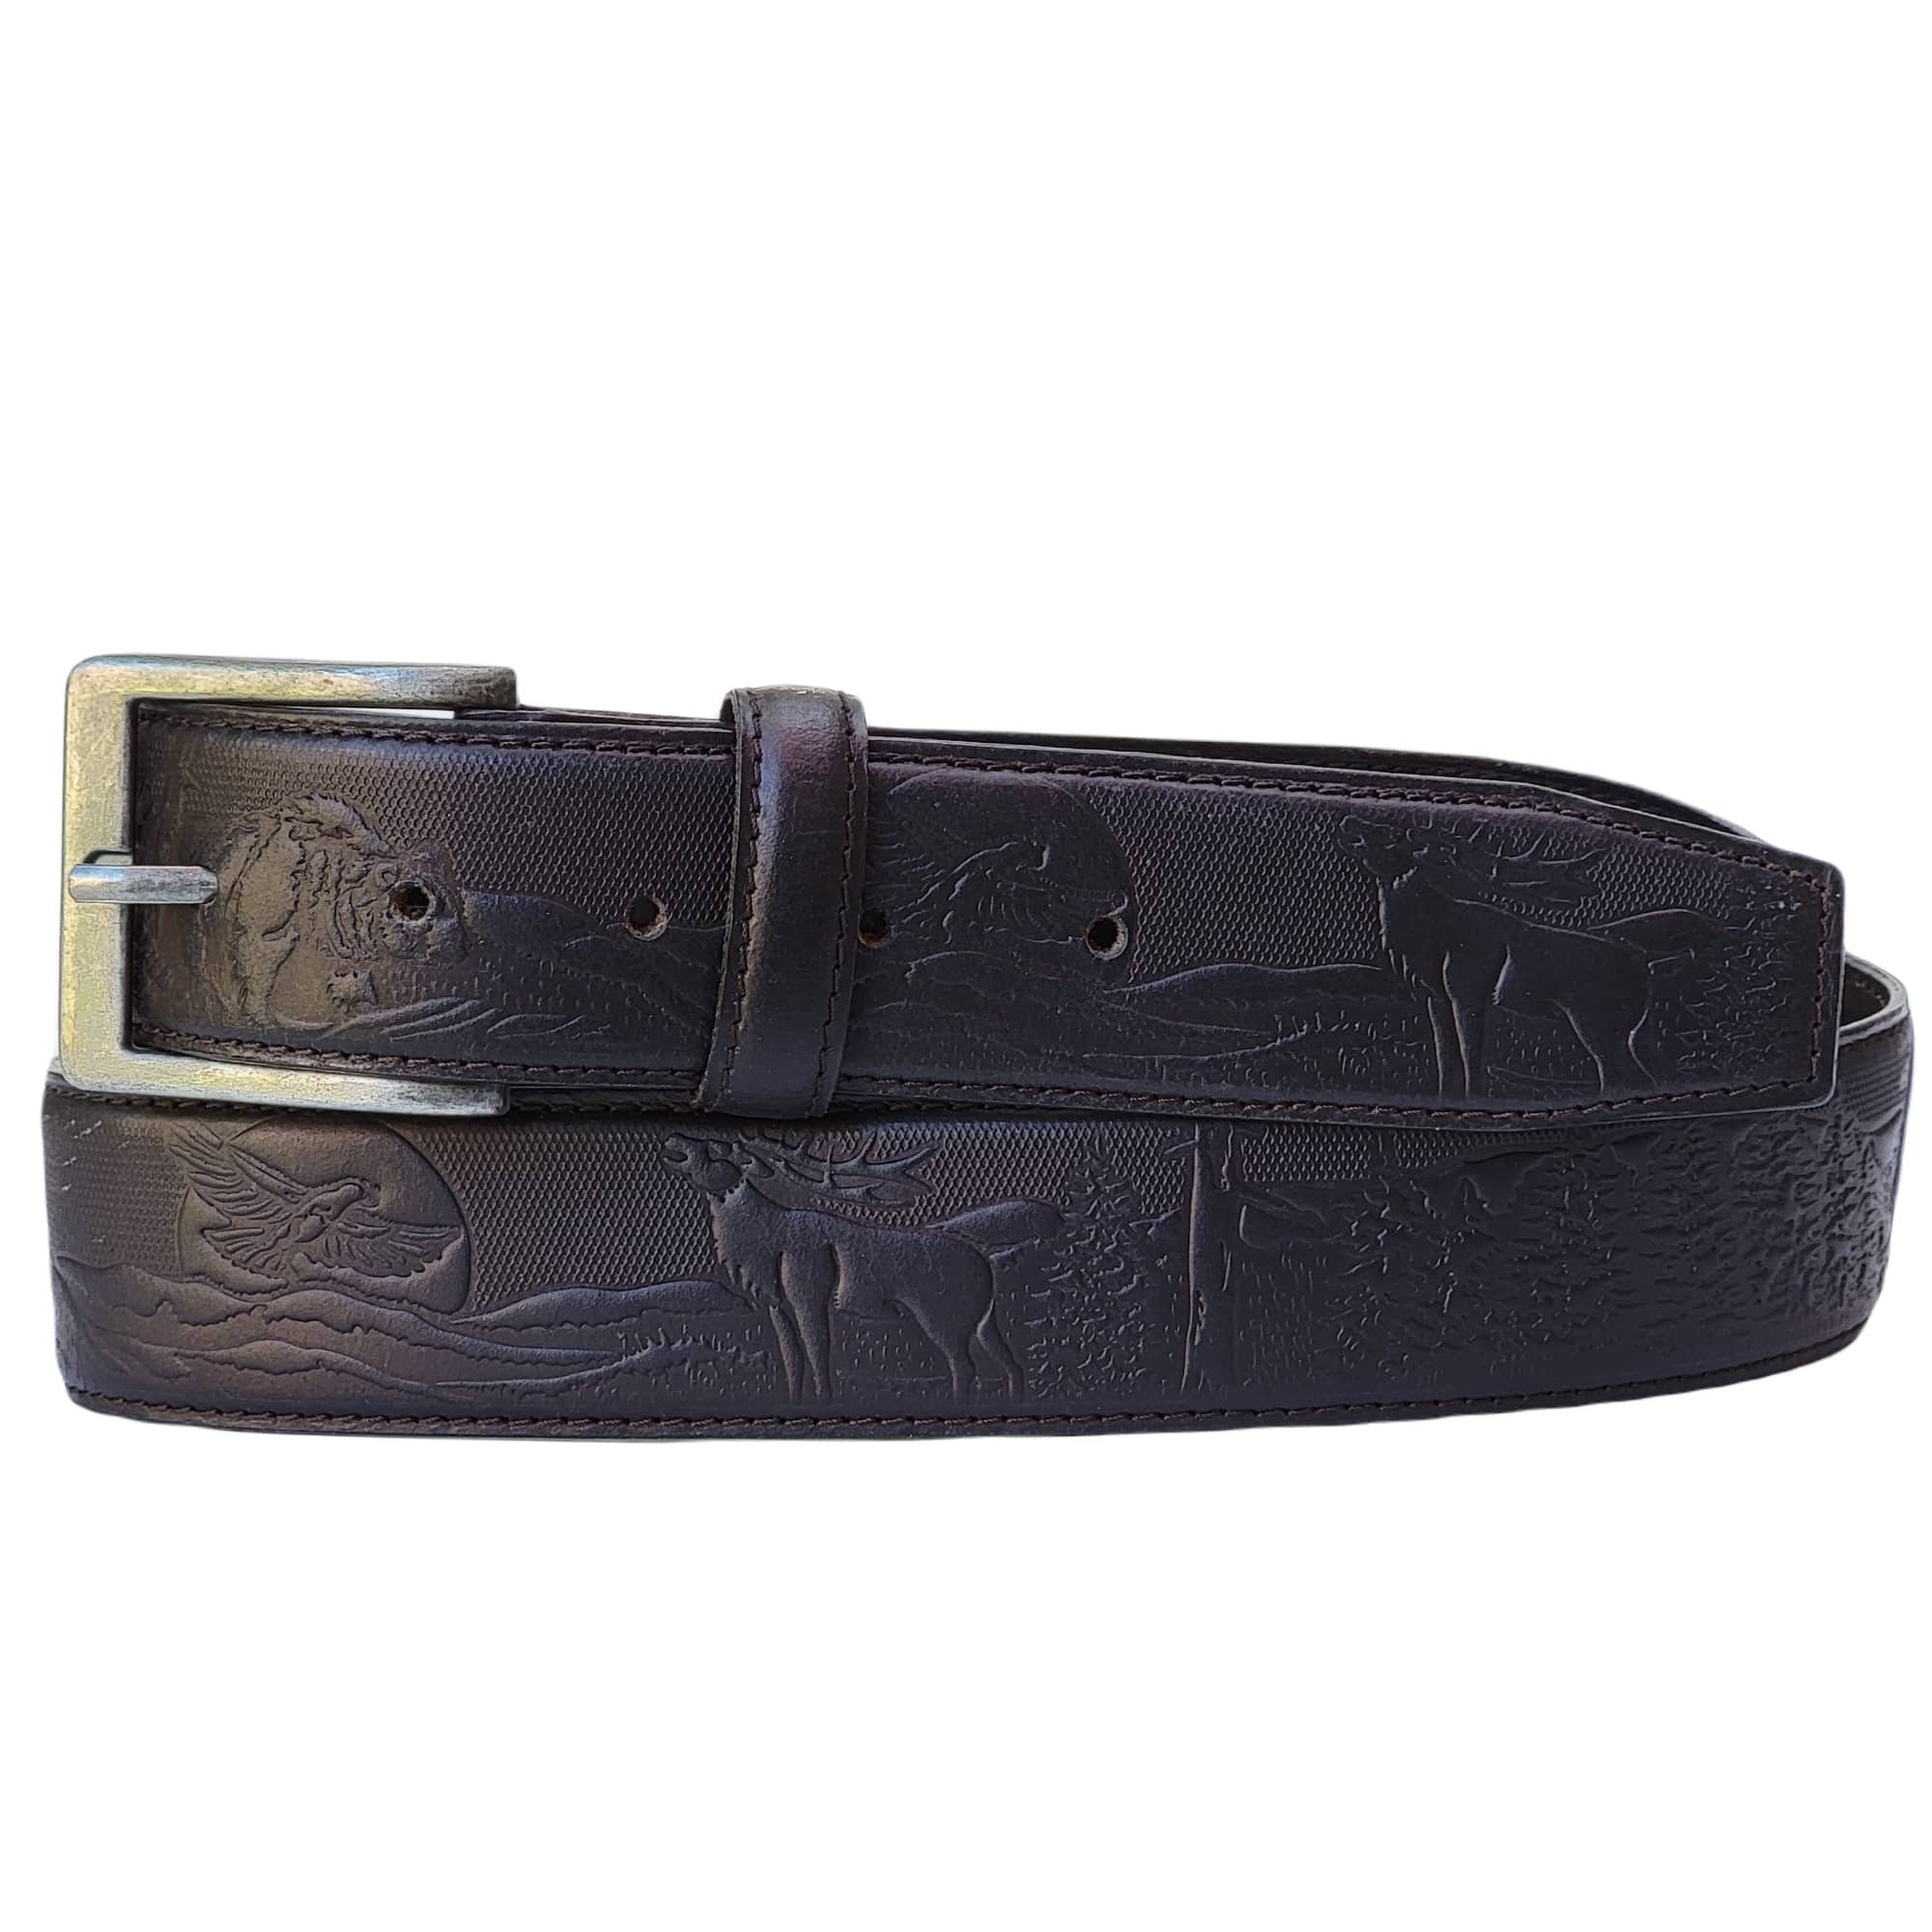 Embossed Leather Belt, - Gift Embossed Gift HANDCRAFTED Canada, 100% Made Full Leather for in Belt Embossed, Him, for Wildlife Dad Etsy Grain